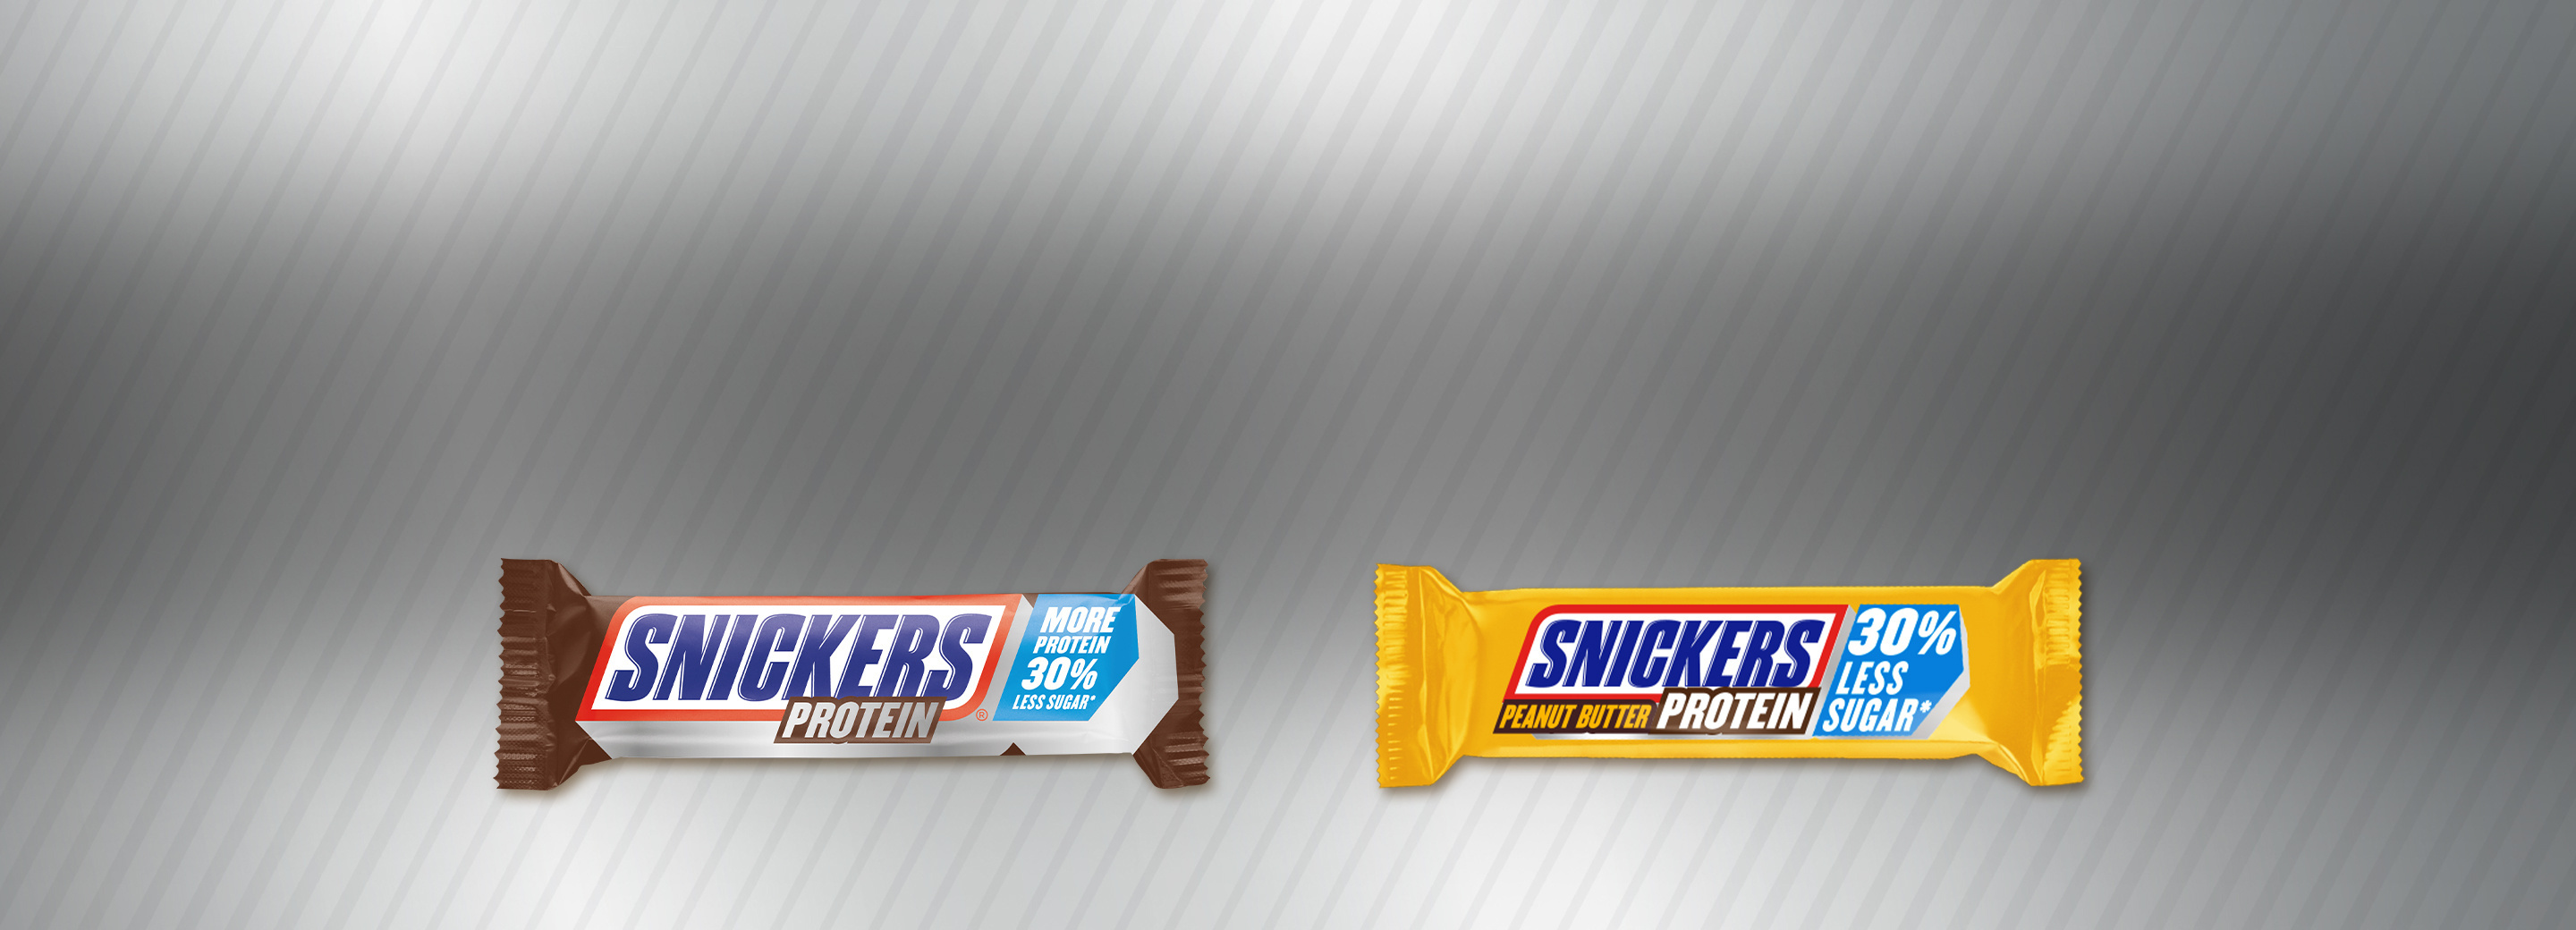 Snickers Protein header